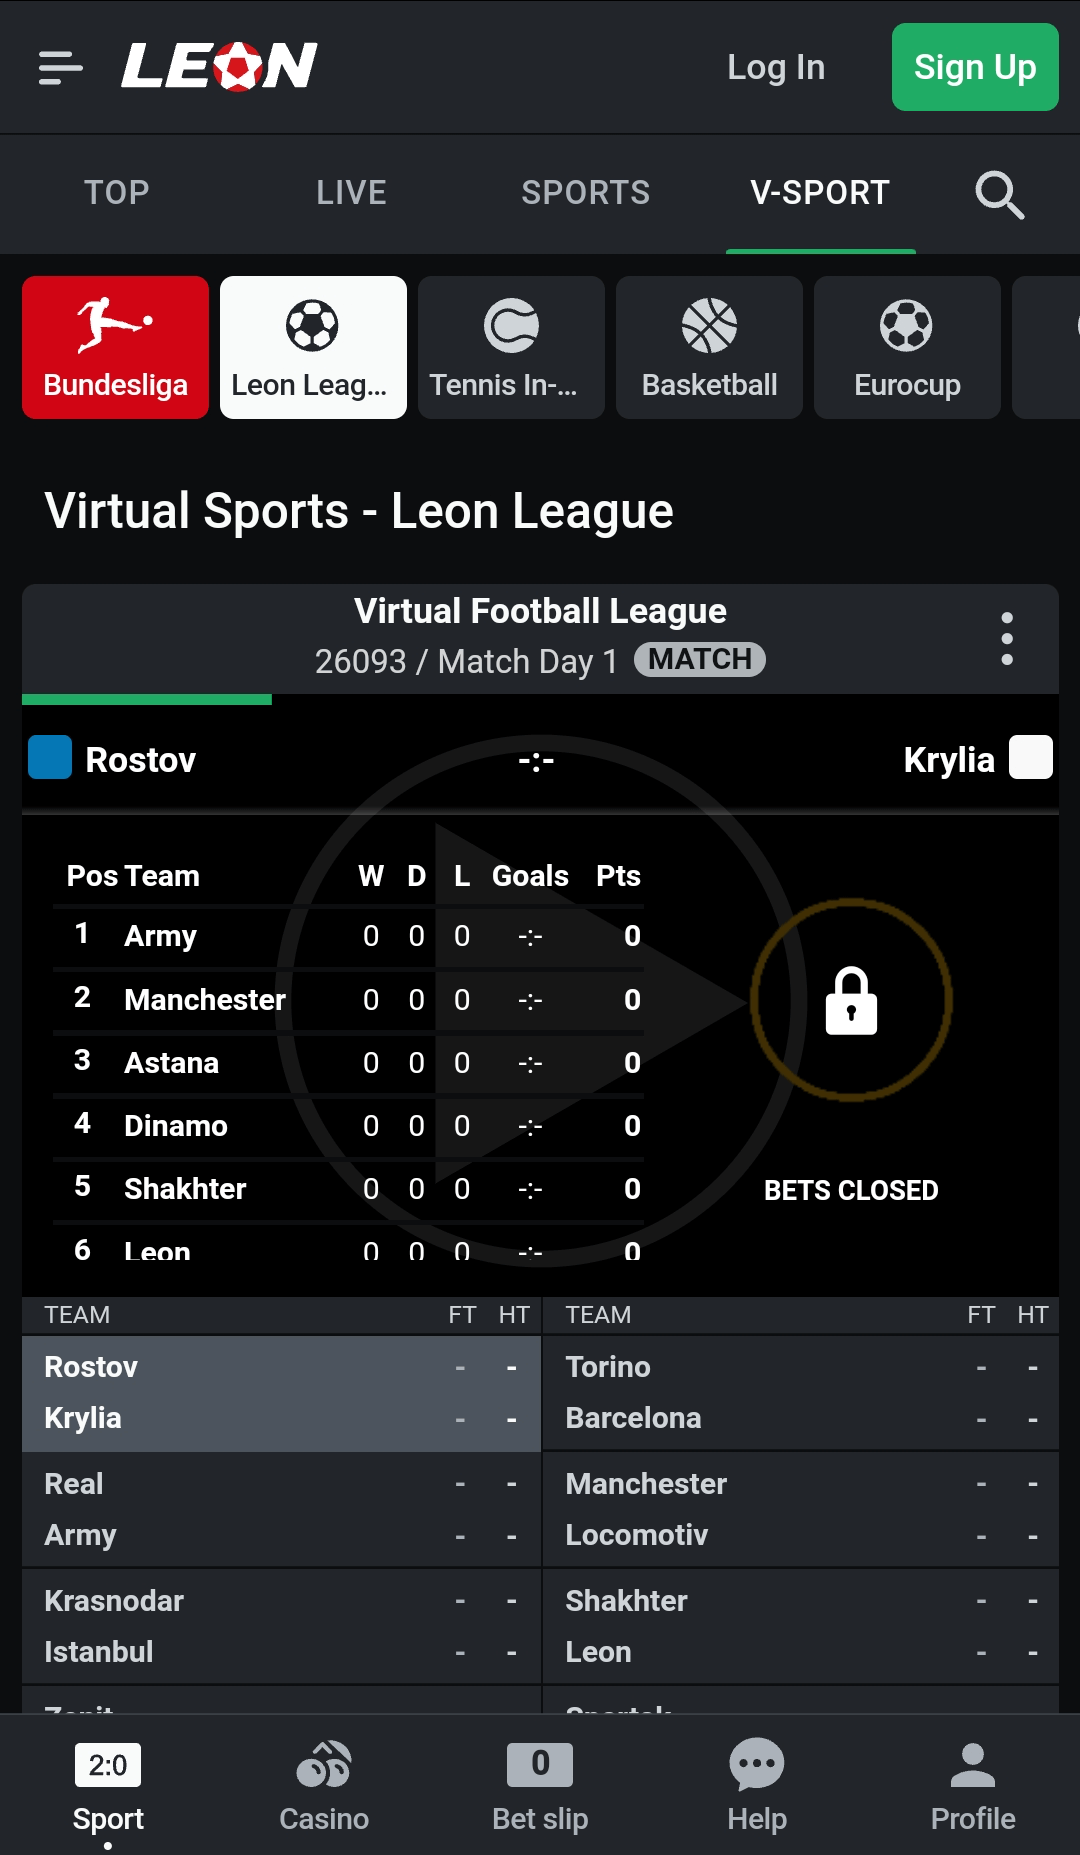 A separate virtual sports section in the Leon Bet app